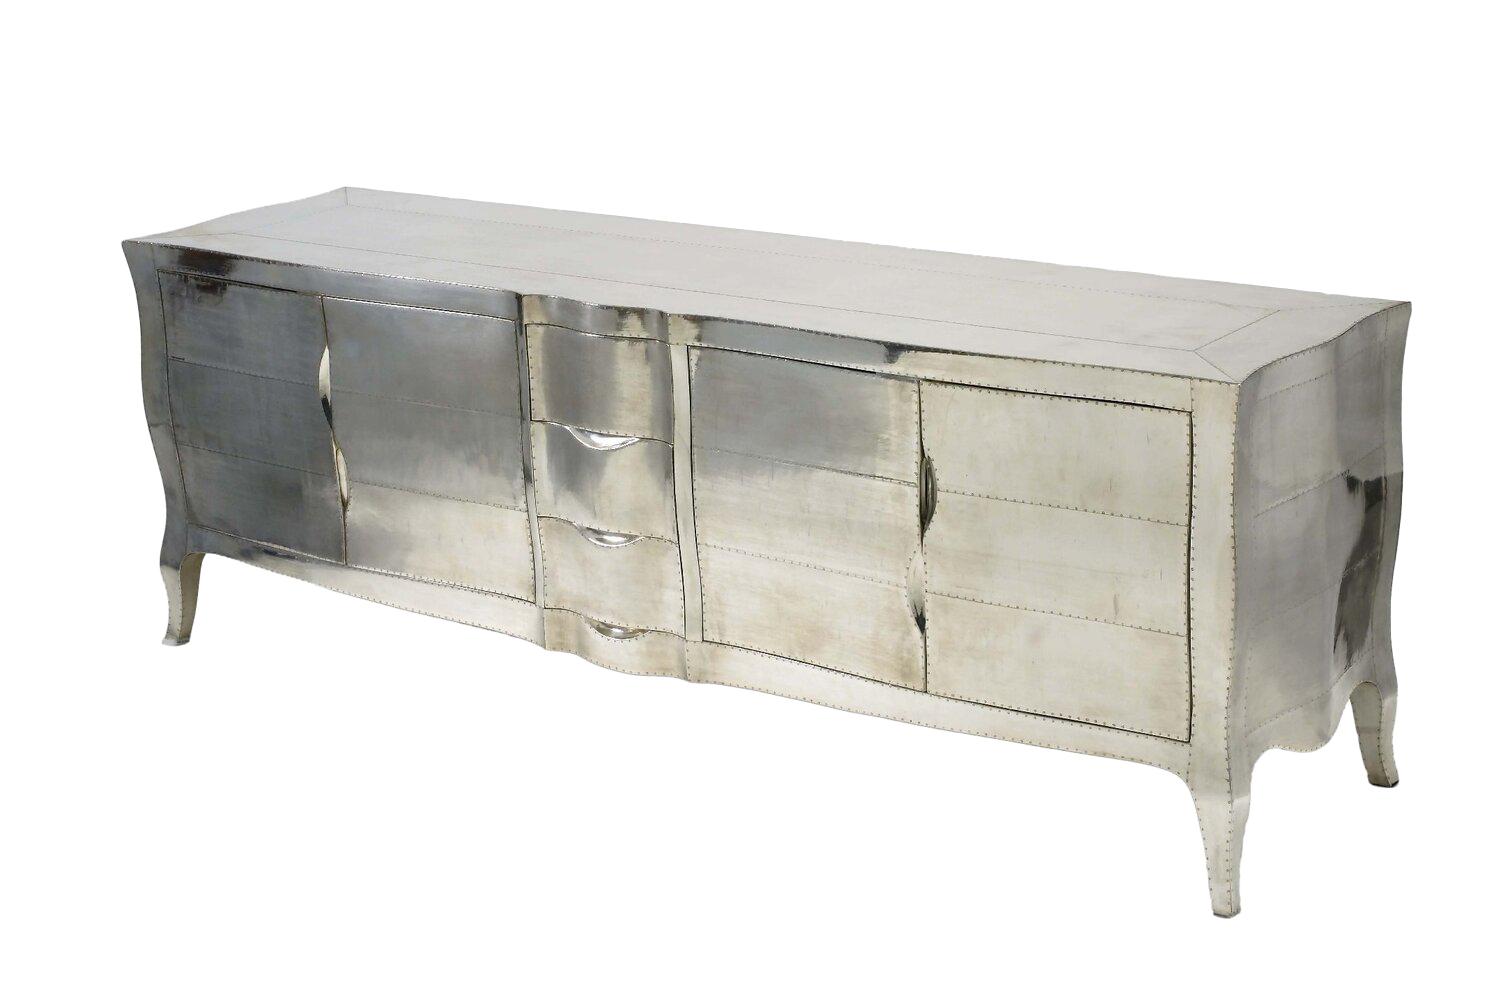 Louis XV credenza dresser sideboard in white bronze was designed by the renowned designer Paul Mathieu. He created this credenza dresser sideboard which is a more feminine version of Louis XV (1730-1760) furniture. This credenza dresser features the